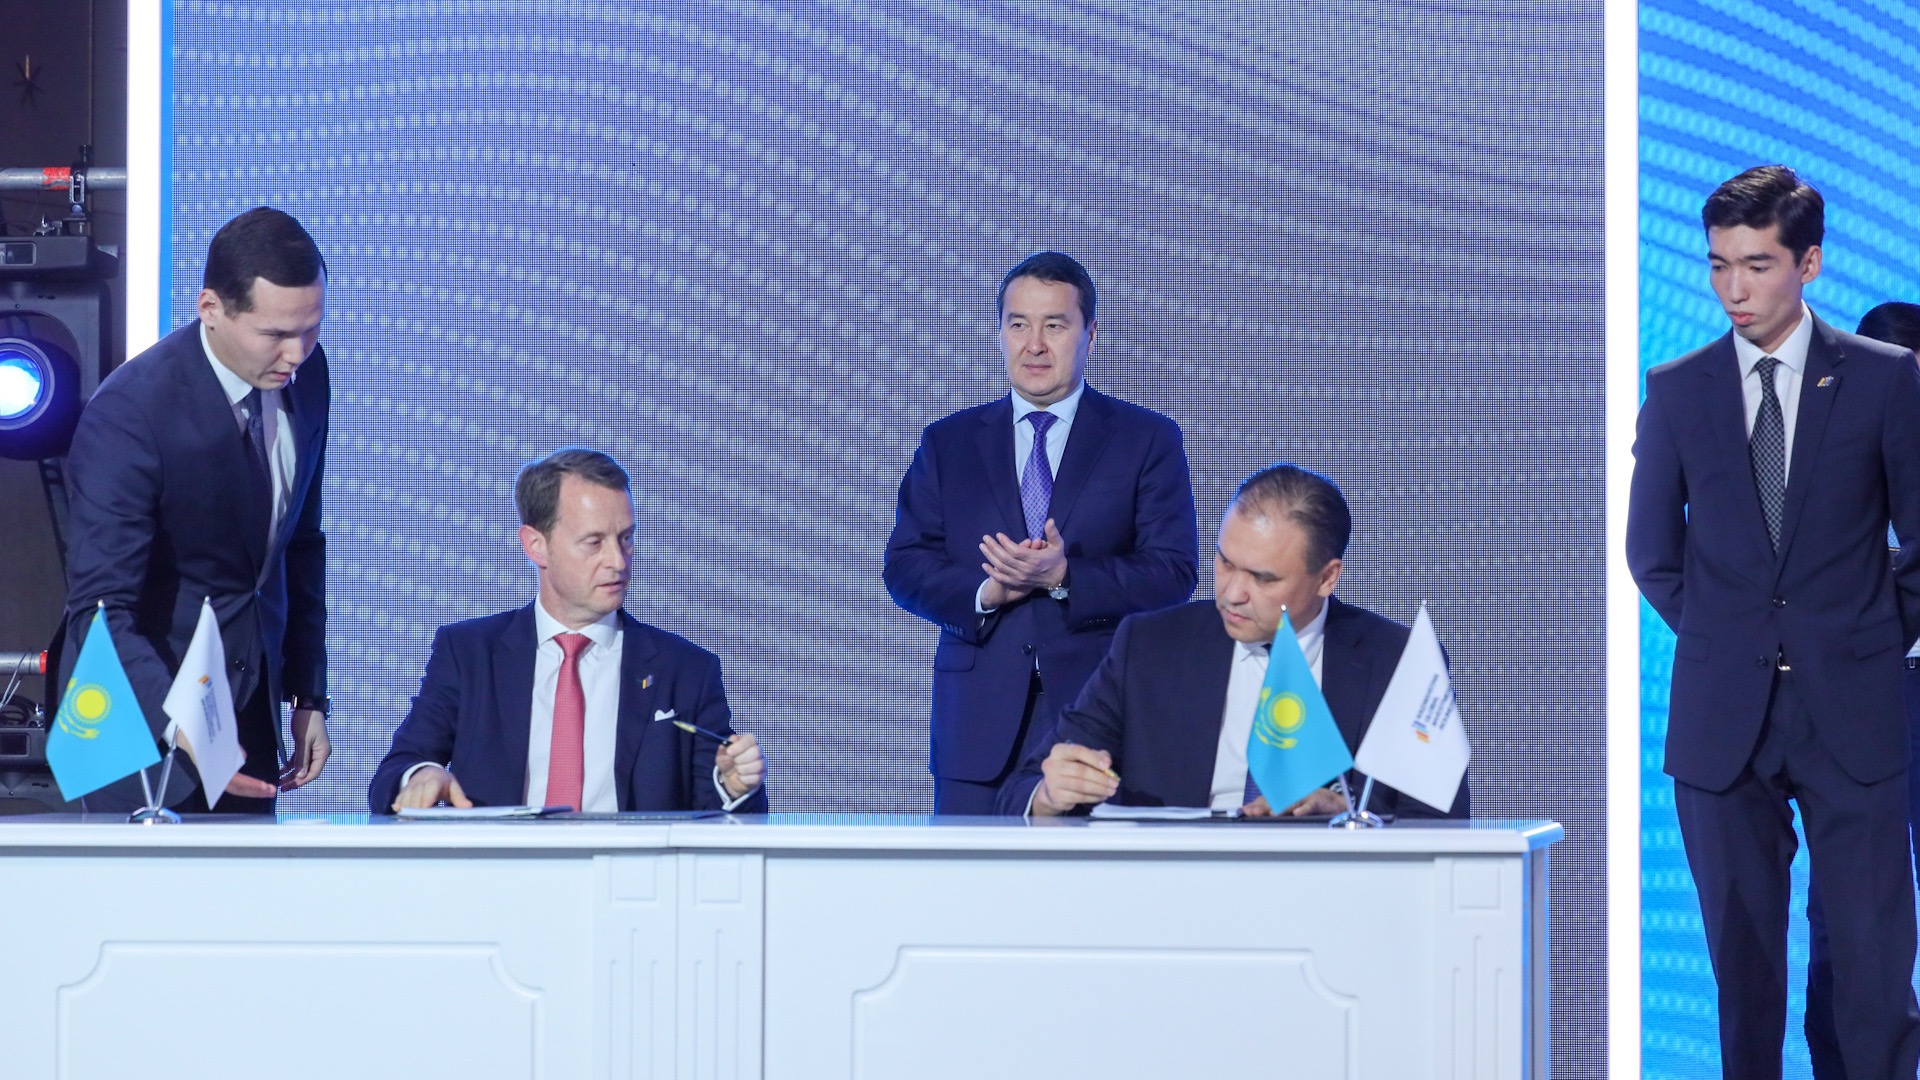 Kazakhstan attracts $1.6bn investments from global giants like Pfizer and Çalık Holding 